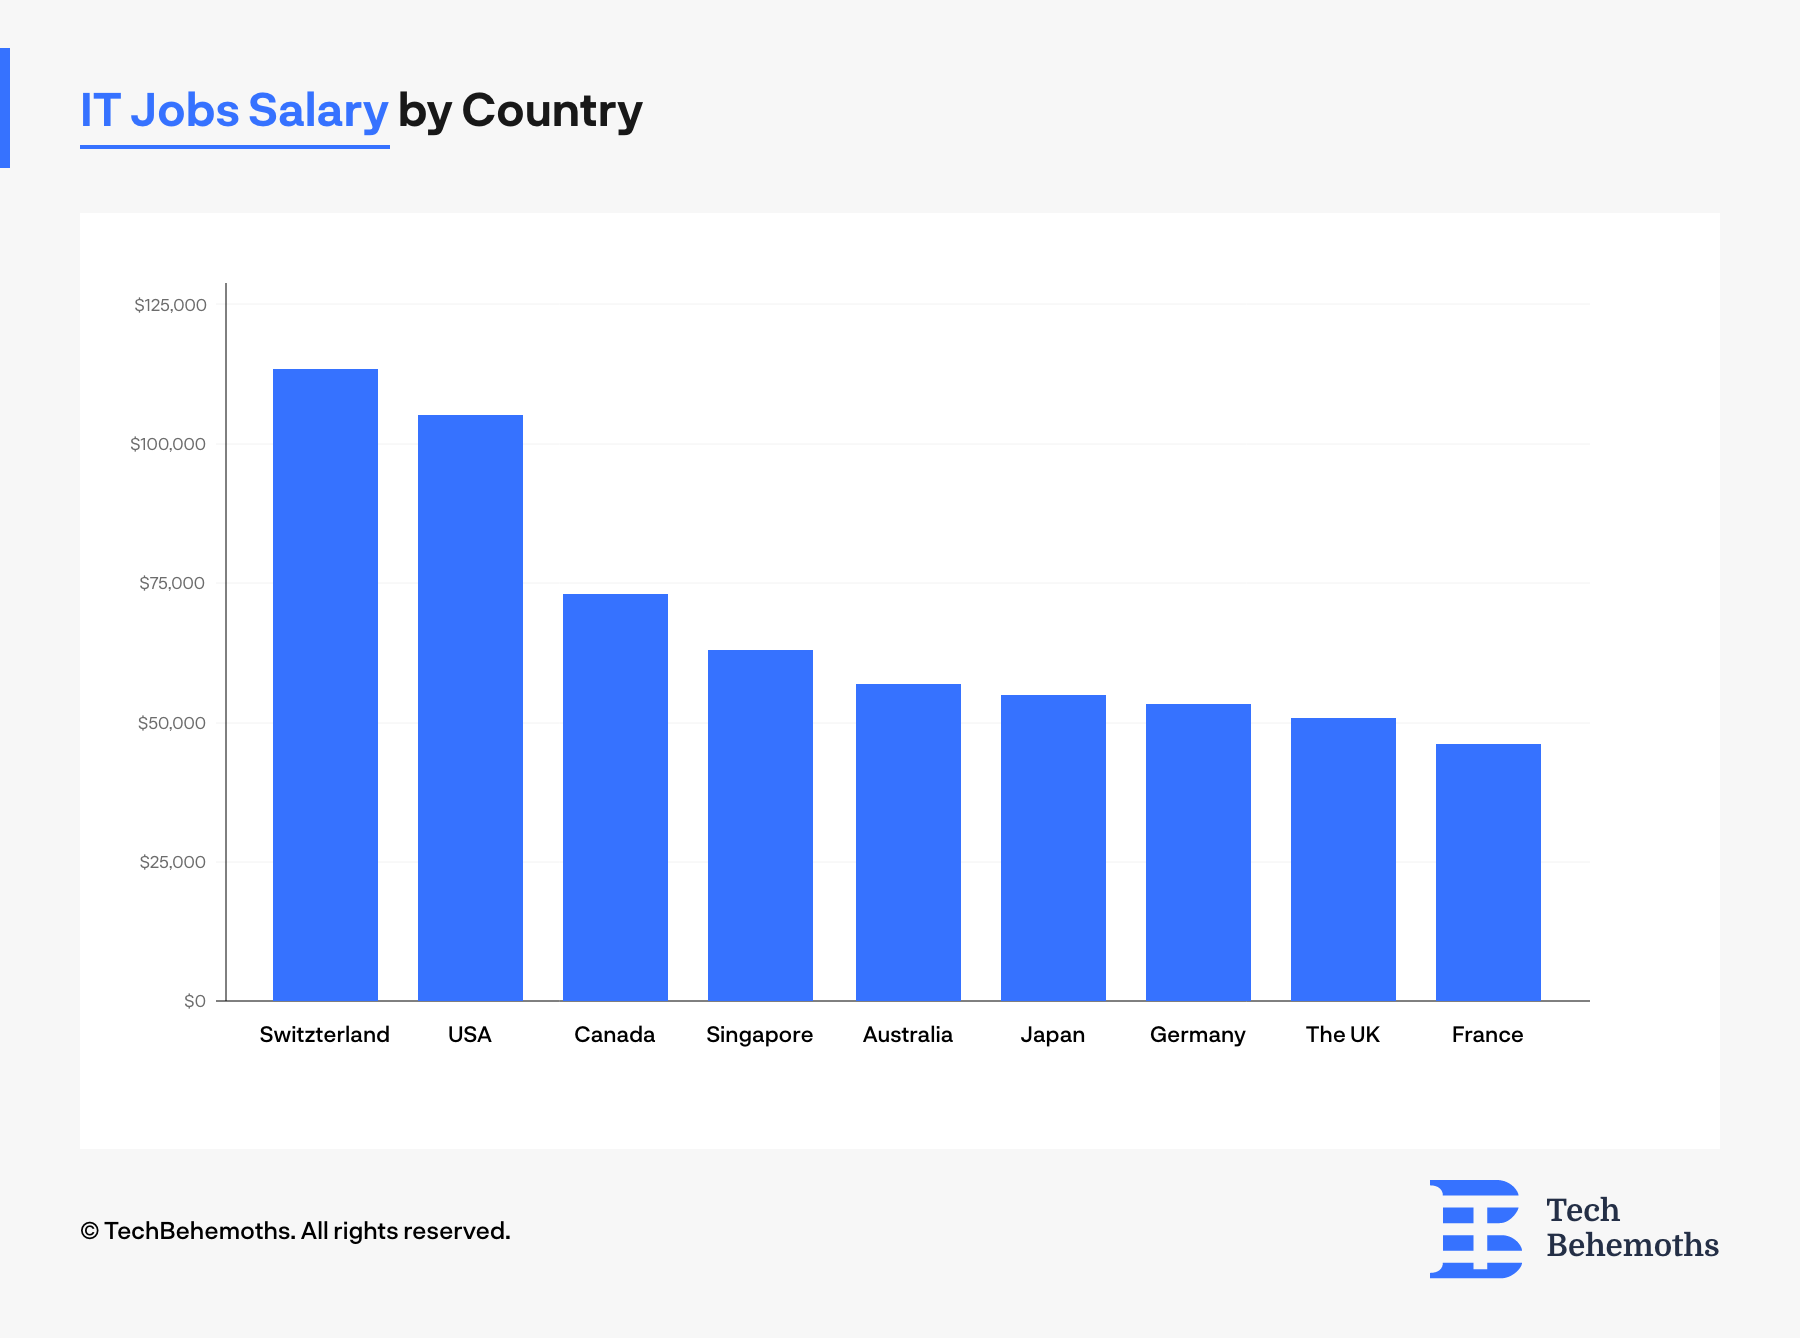 IT Jobs salary by country